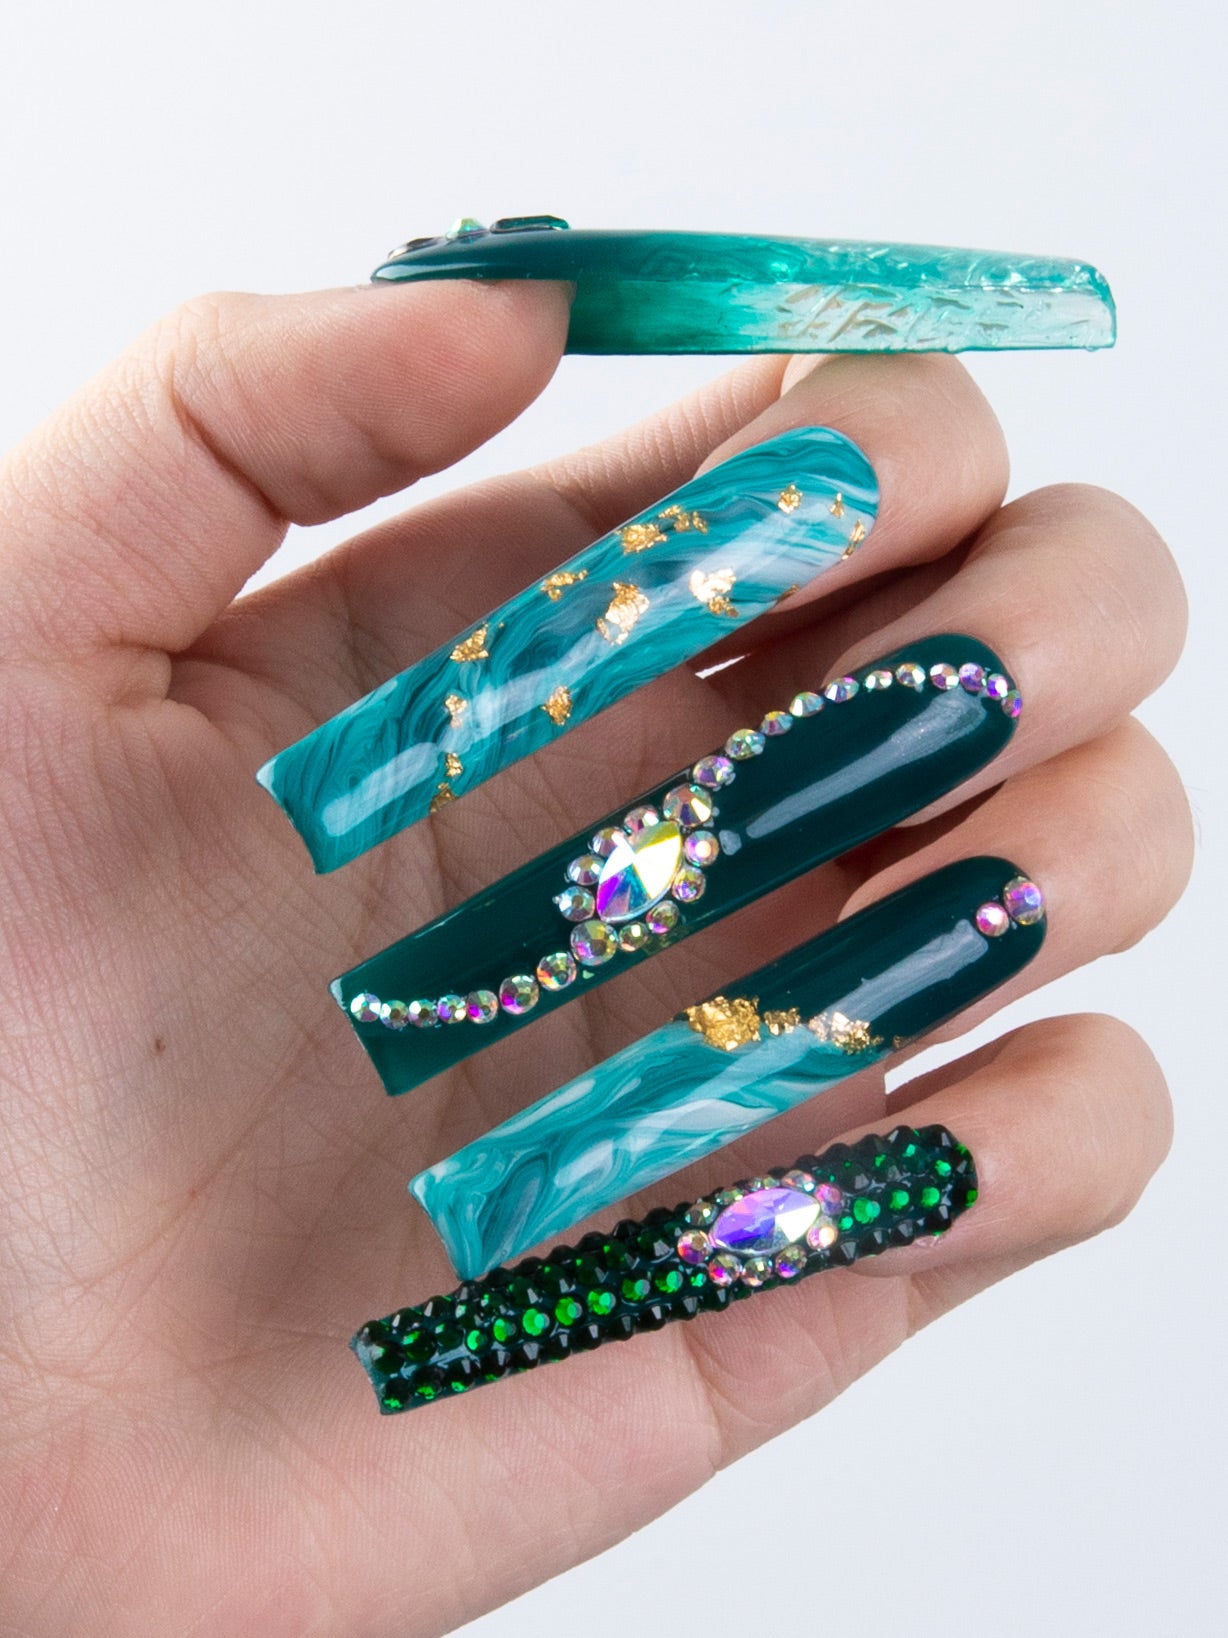 Hand showcasing the Emerald Envy press-on nails by Lovful.com, featuring intricate gold decor and crystal embellishments in vibrant shades of green. Long square shapes enhance the trendy design.